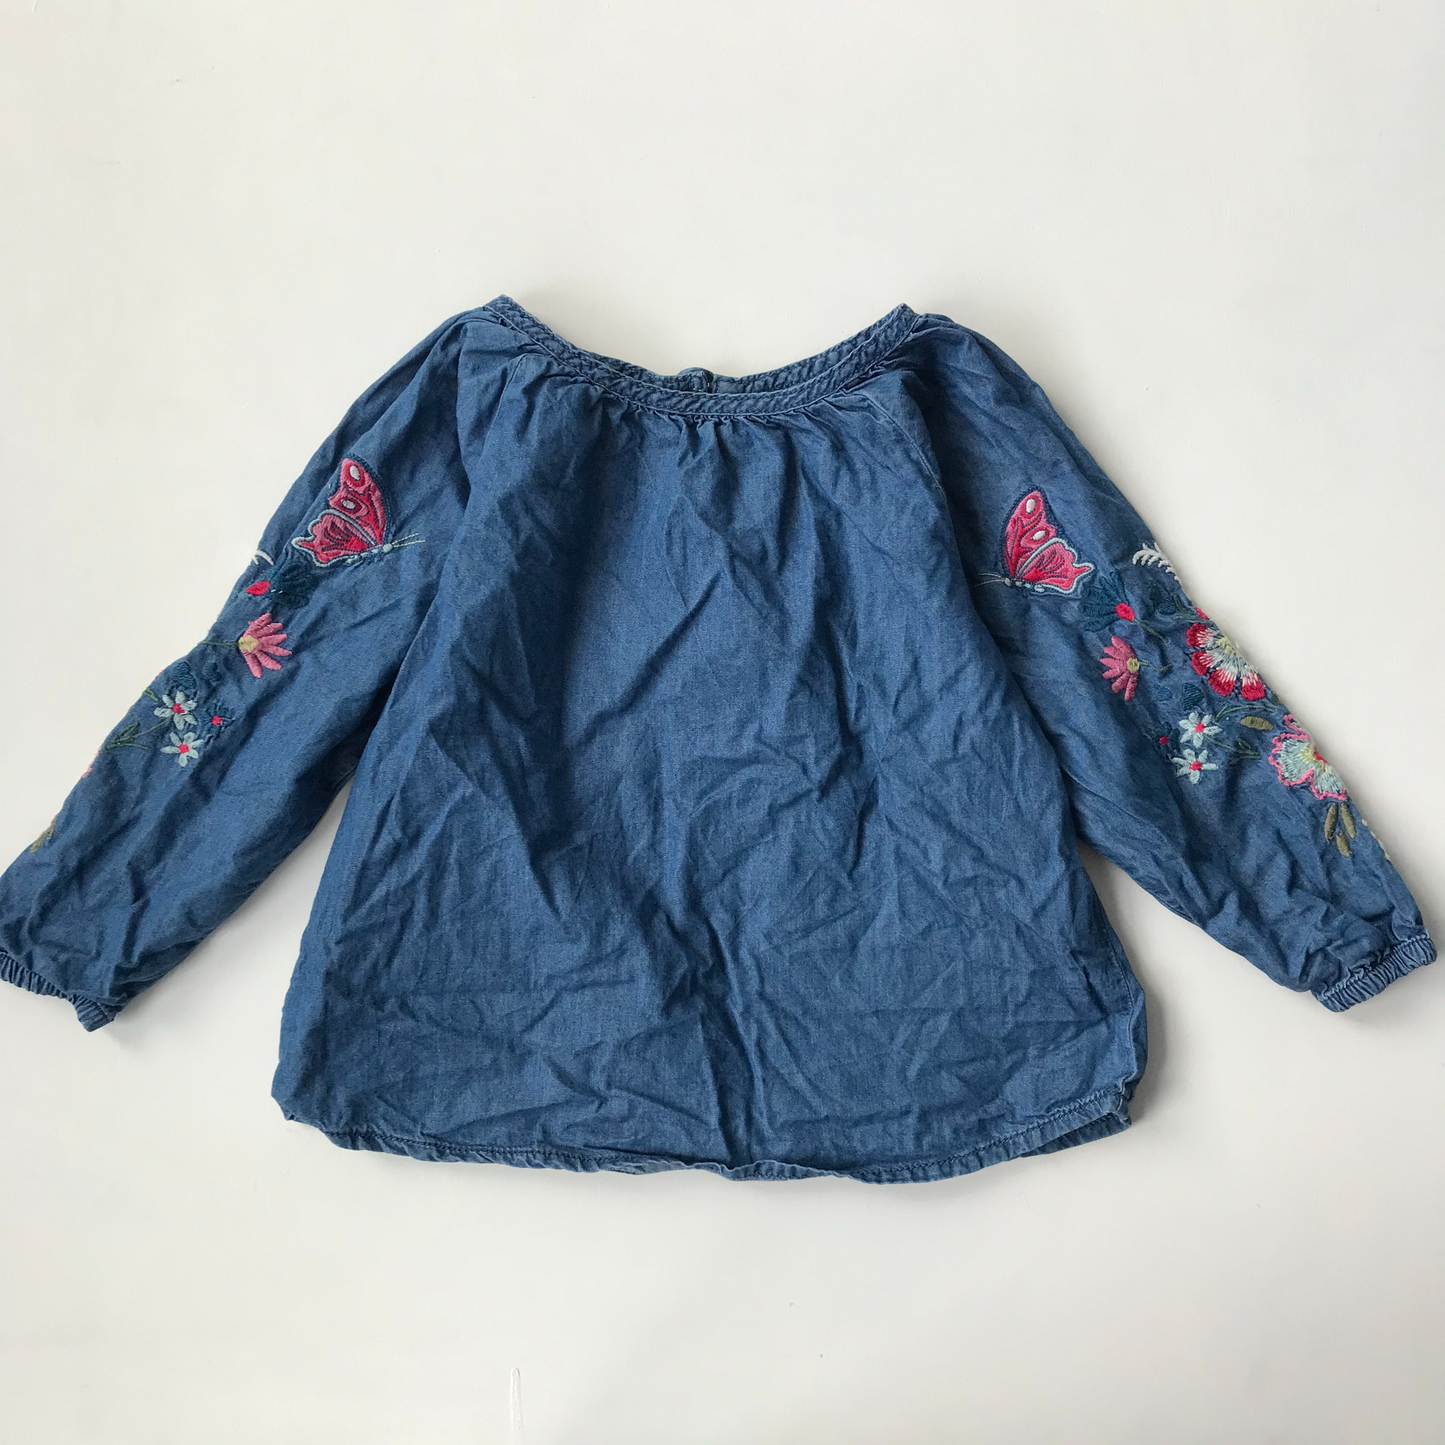 Blouse - Denim Style with Embroidery - Age 5